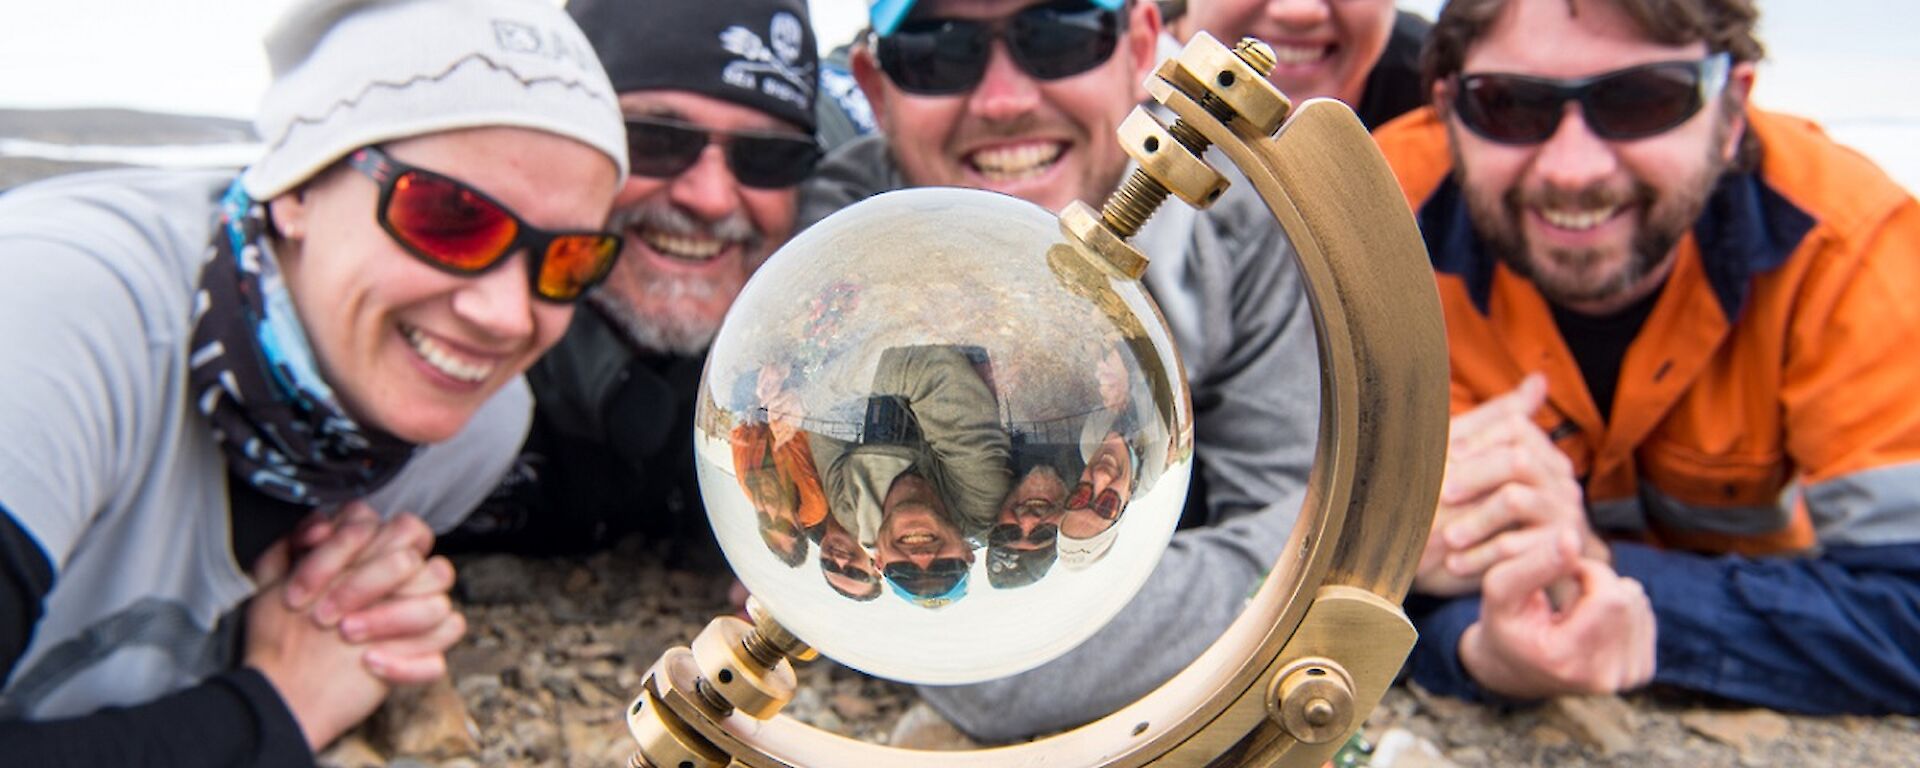 Daleen, Barry, Damo, Rachel and Aaron are lying in a half circle, on the ground, looking at the sunshine recorder. This device looks like a hybrid between a sextant and a crystal ball.